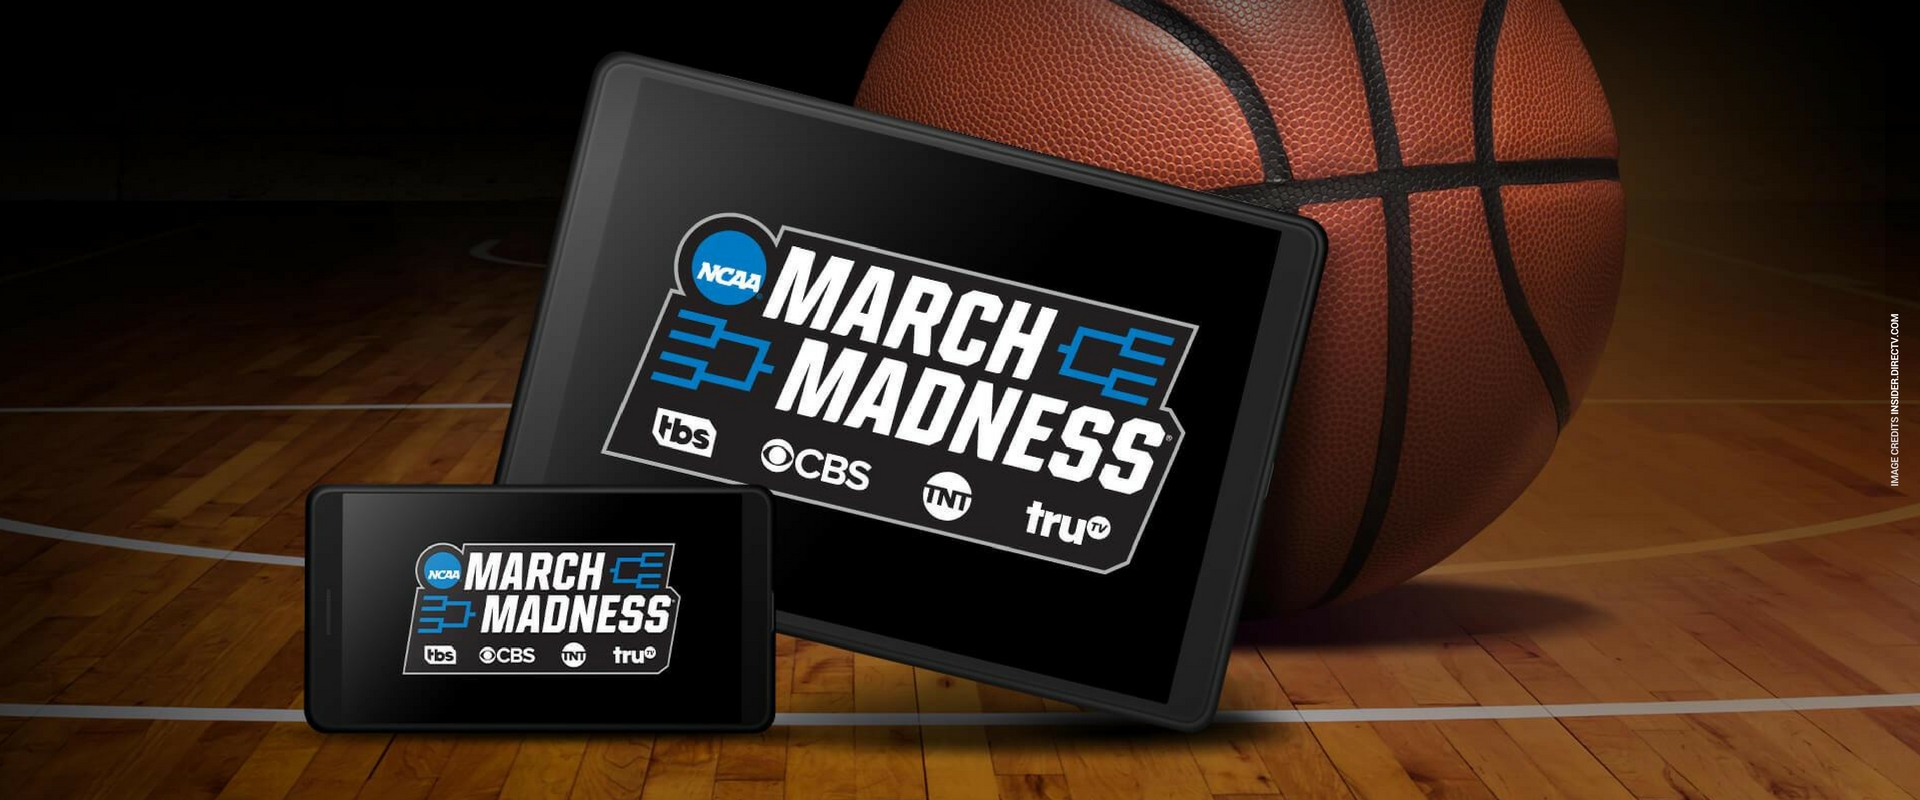 march madness live app mobile